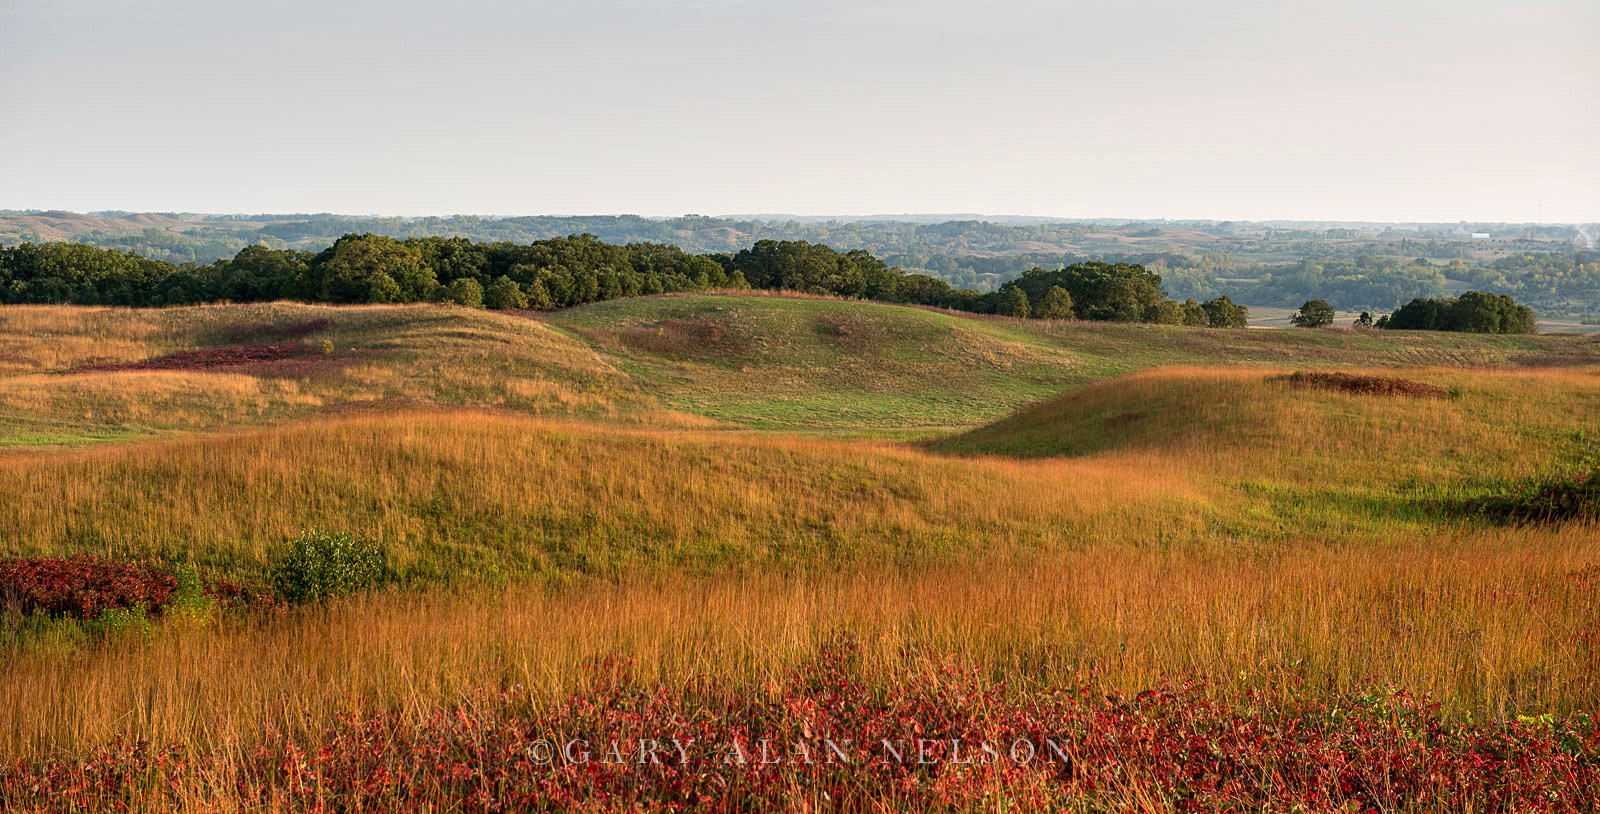 Glacial moraine and prairie grasses at the Nature Conservancy's Ordway Prairie, south central Minnesota